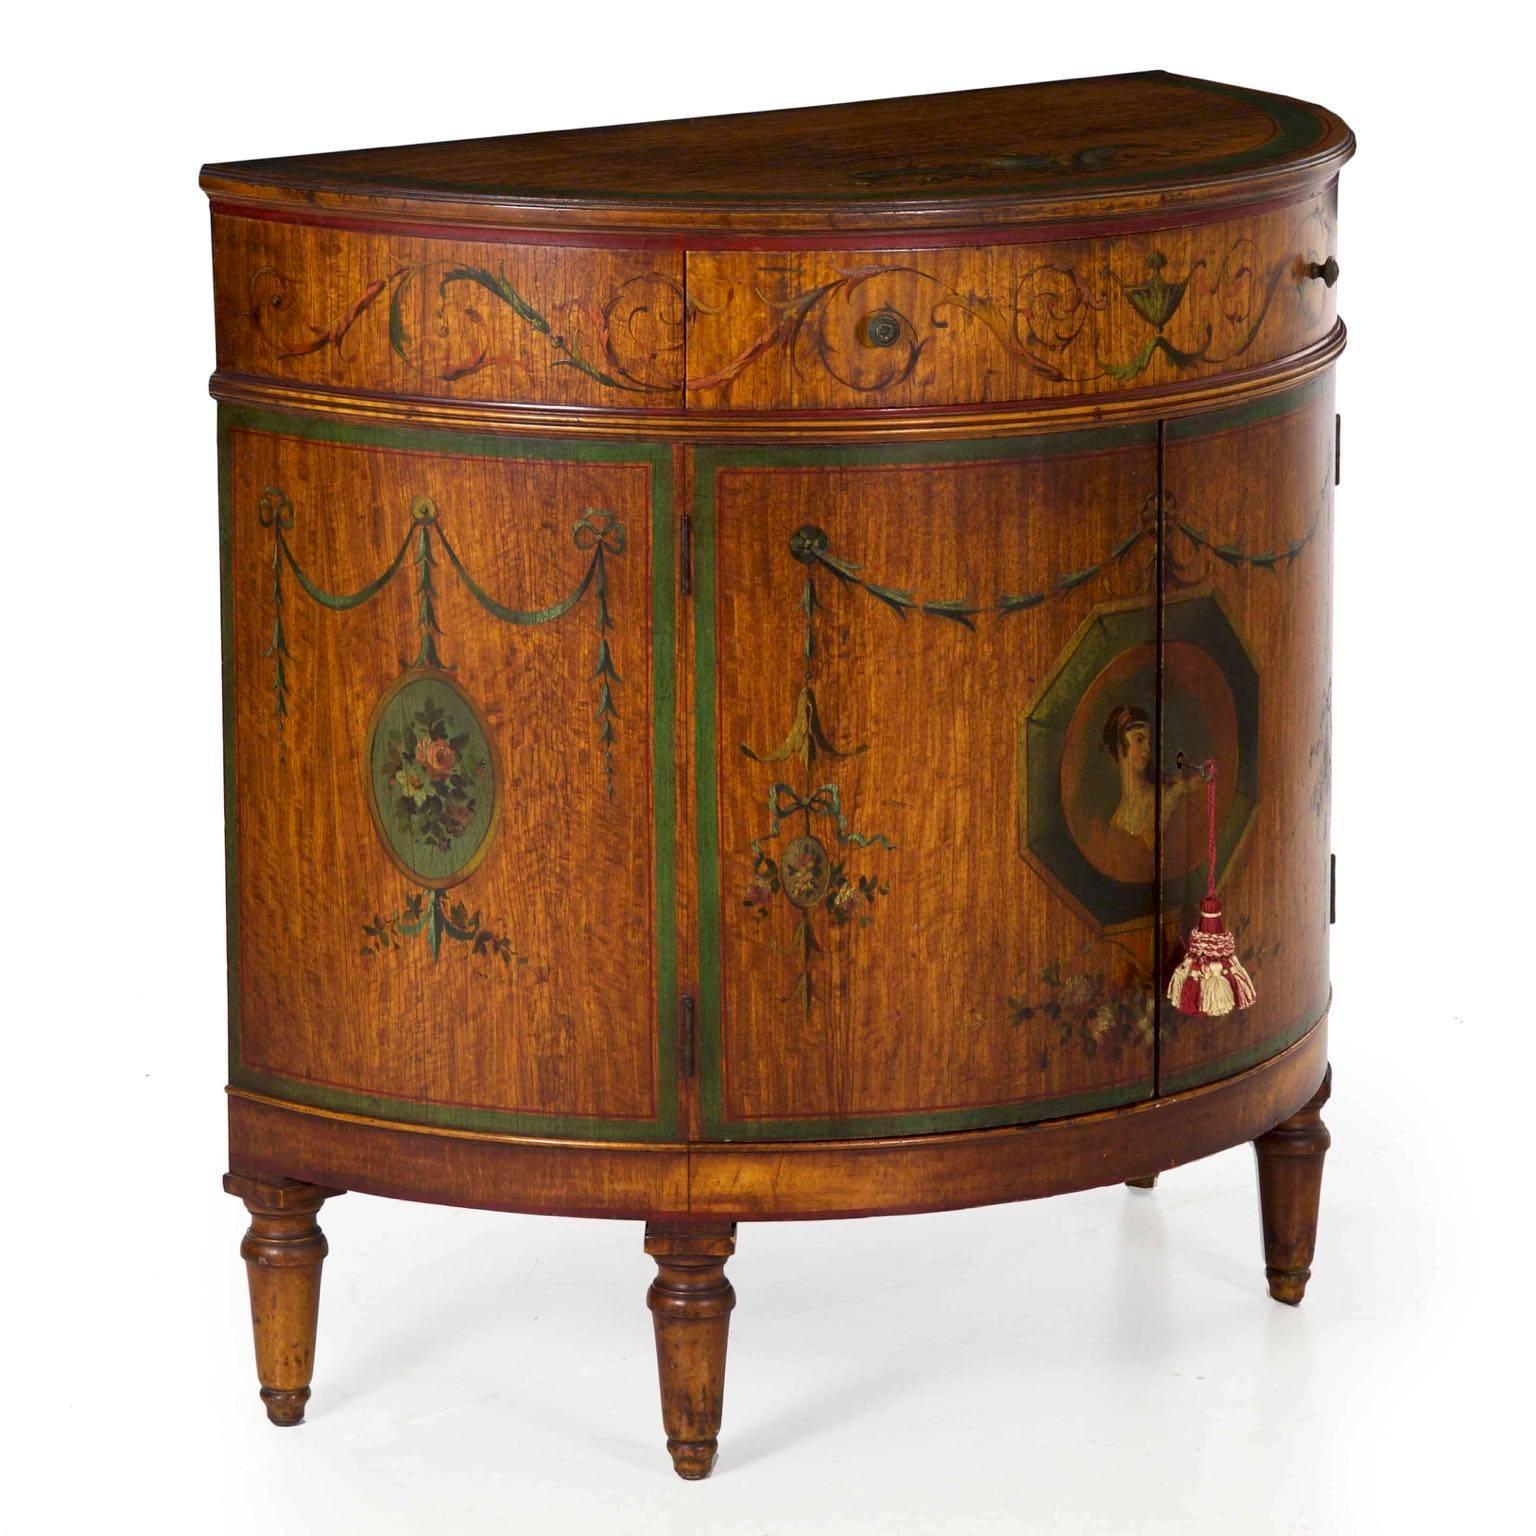 This is an incredibly striking demilune cabinet with exquisite painted surface detailing throughout. The garlands of draped foliage, the urn in the centre of the drawer, the strings of honeysuckle and flowing ribbon, everything is expertly painted